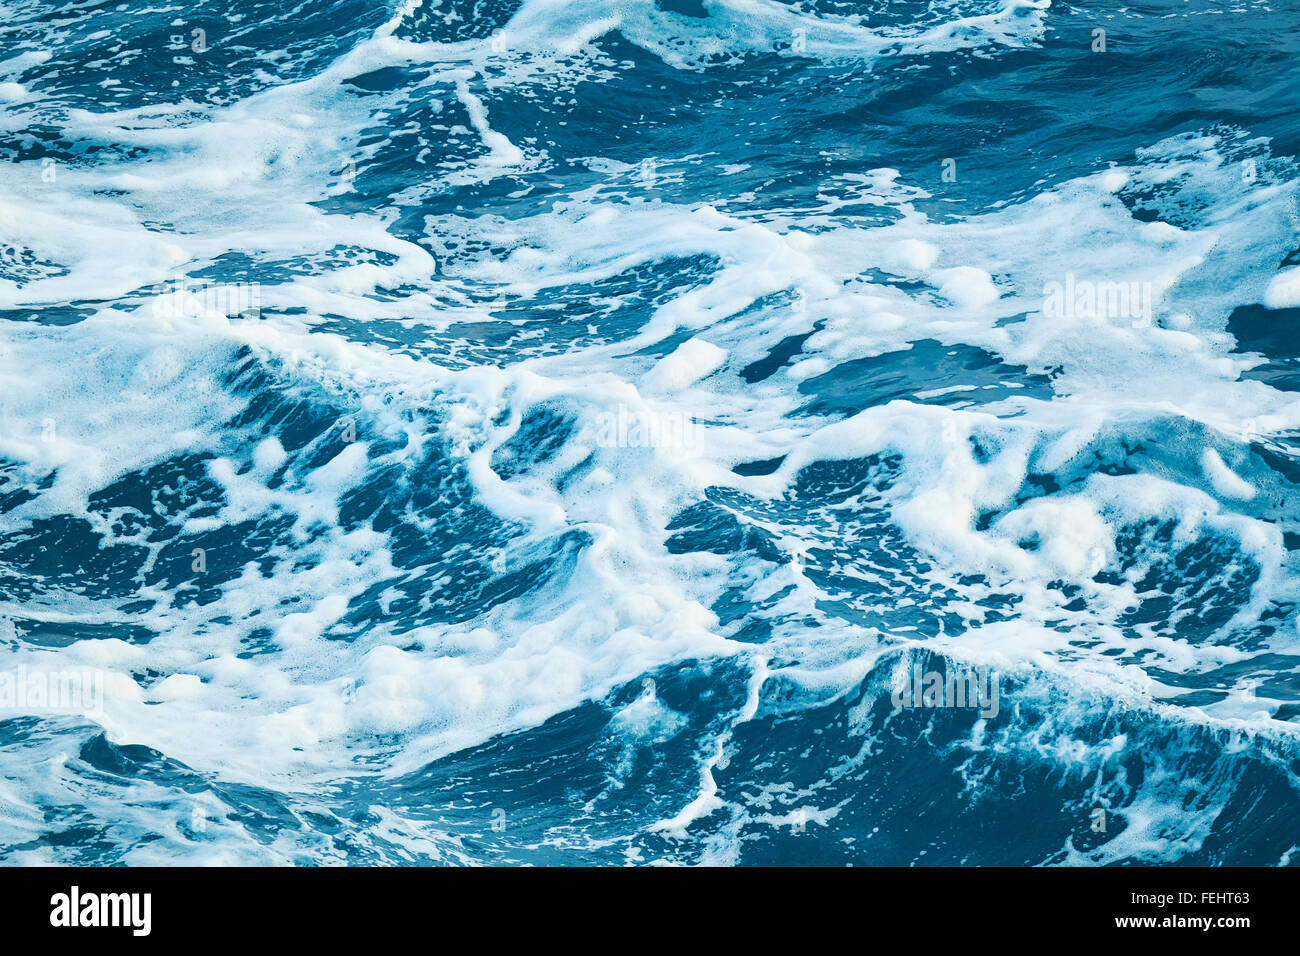 Abstract Ocean Water Texture Stock Photo